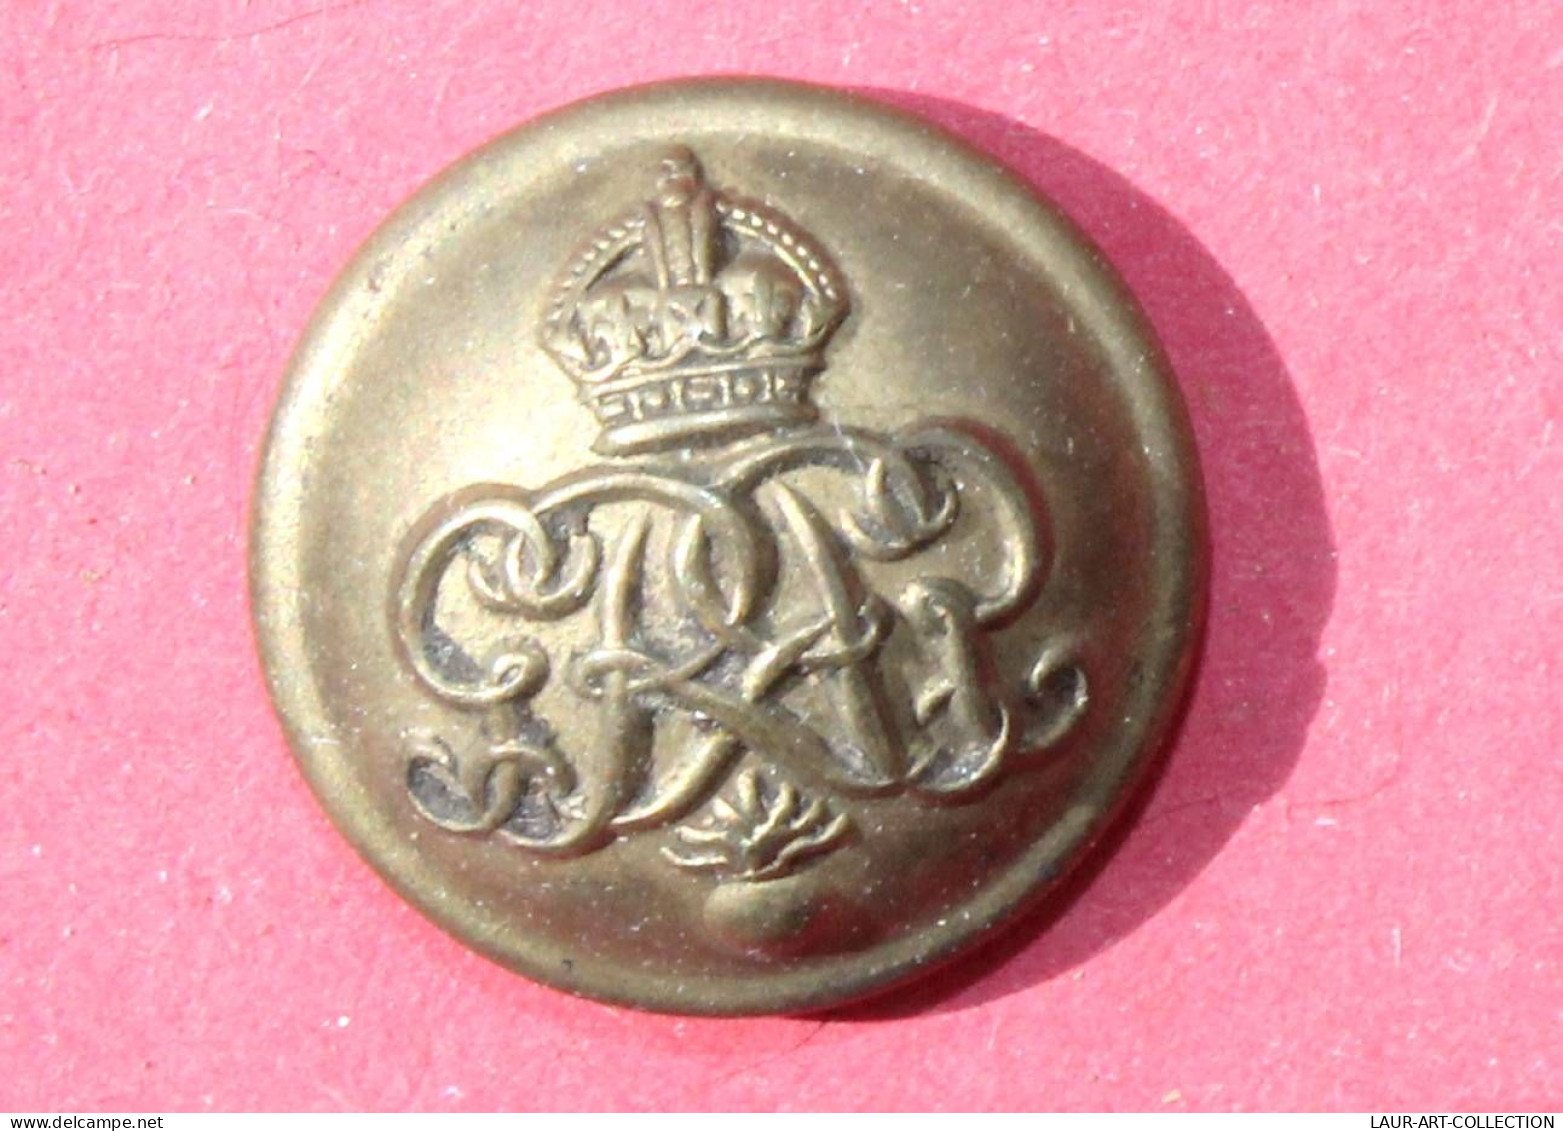 BOUTON UNIFORME MILITAIRE ANGLAIS INITIALE, GRRG, ROYAL ARMY SERVICE CORPS, 19mm / BUTTON ENGLAND MILITARIA (2203.376) - Knöpfe